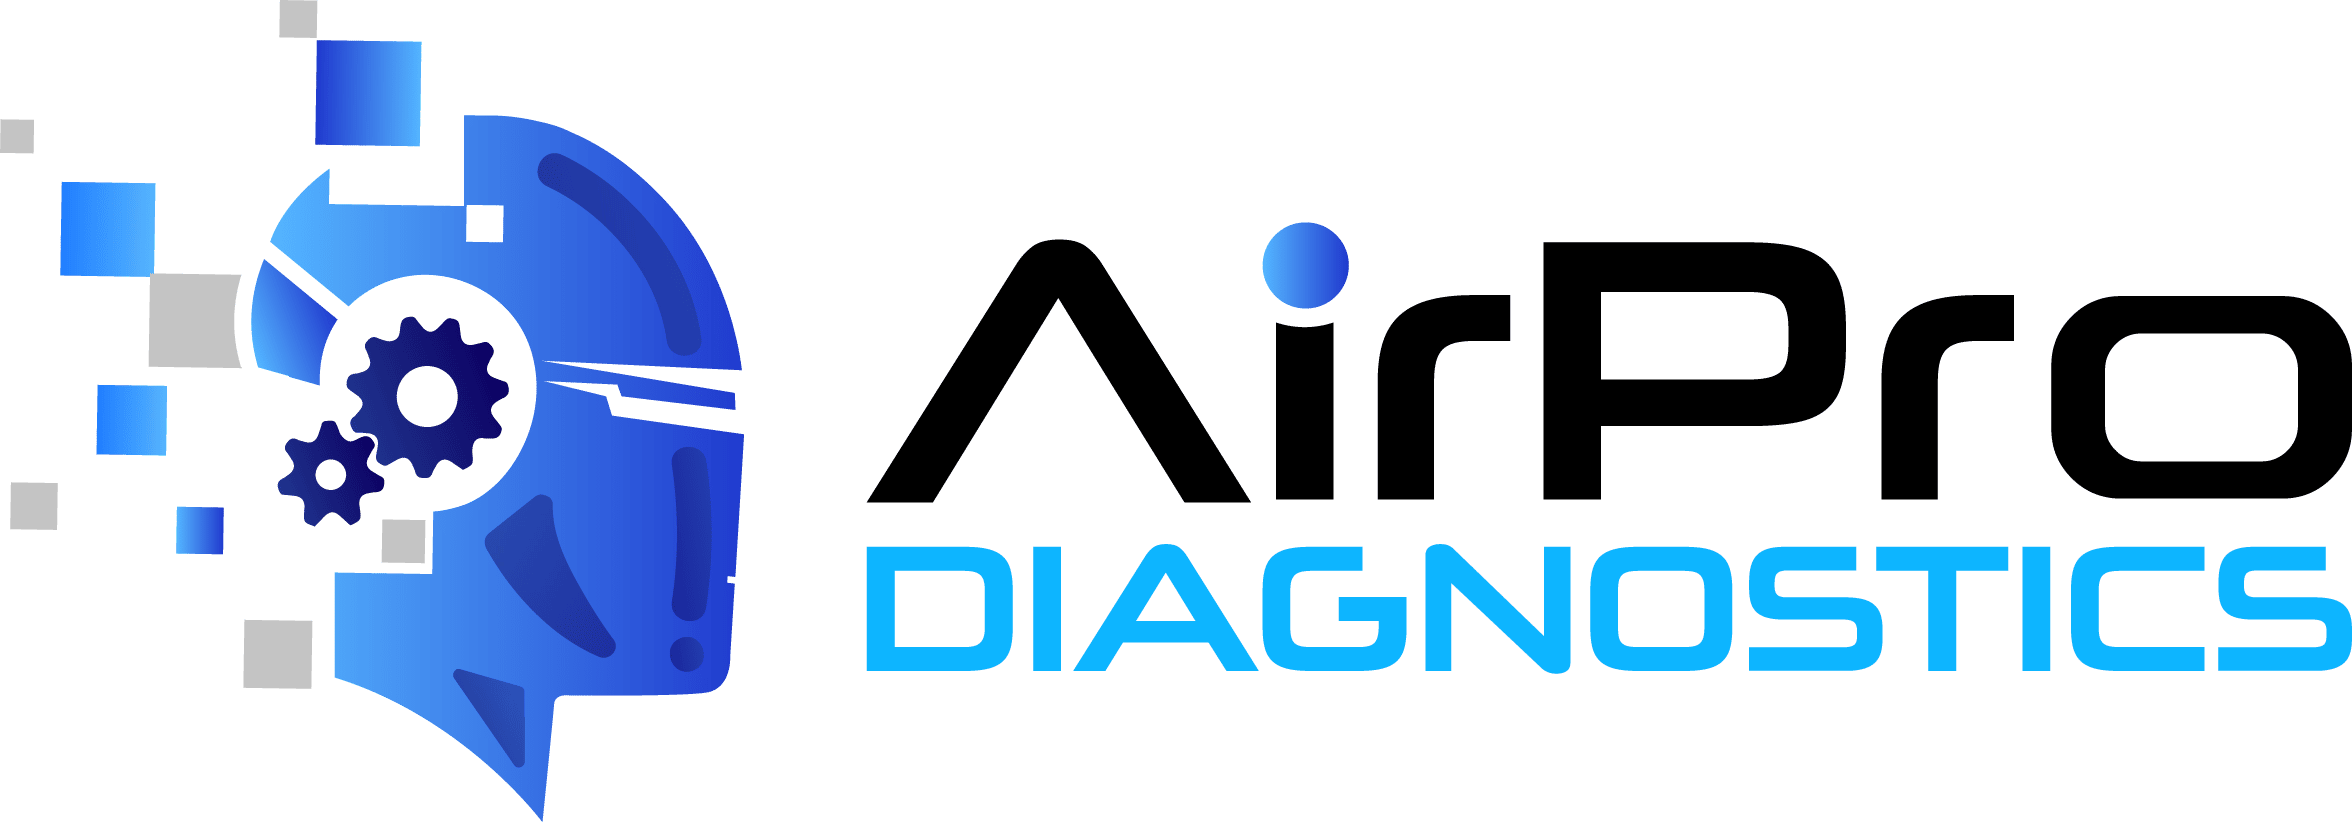 AirPro Diagnostics | Remote Diagnostics & ADAS Scanning | We have a happy work-family here. | AirPro Diagnostics | Remote Diagnostics & ADAS Scanning